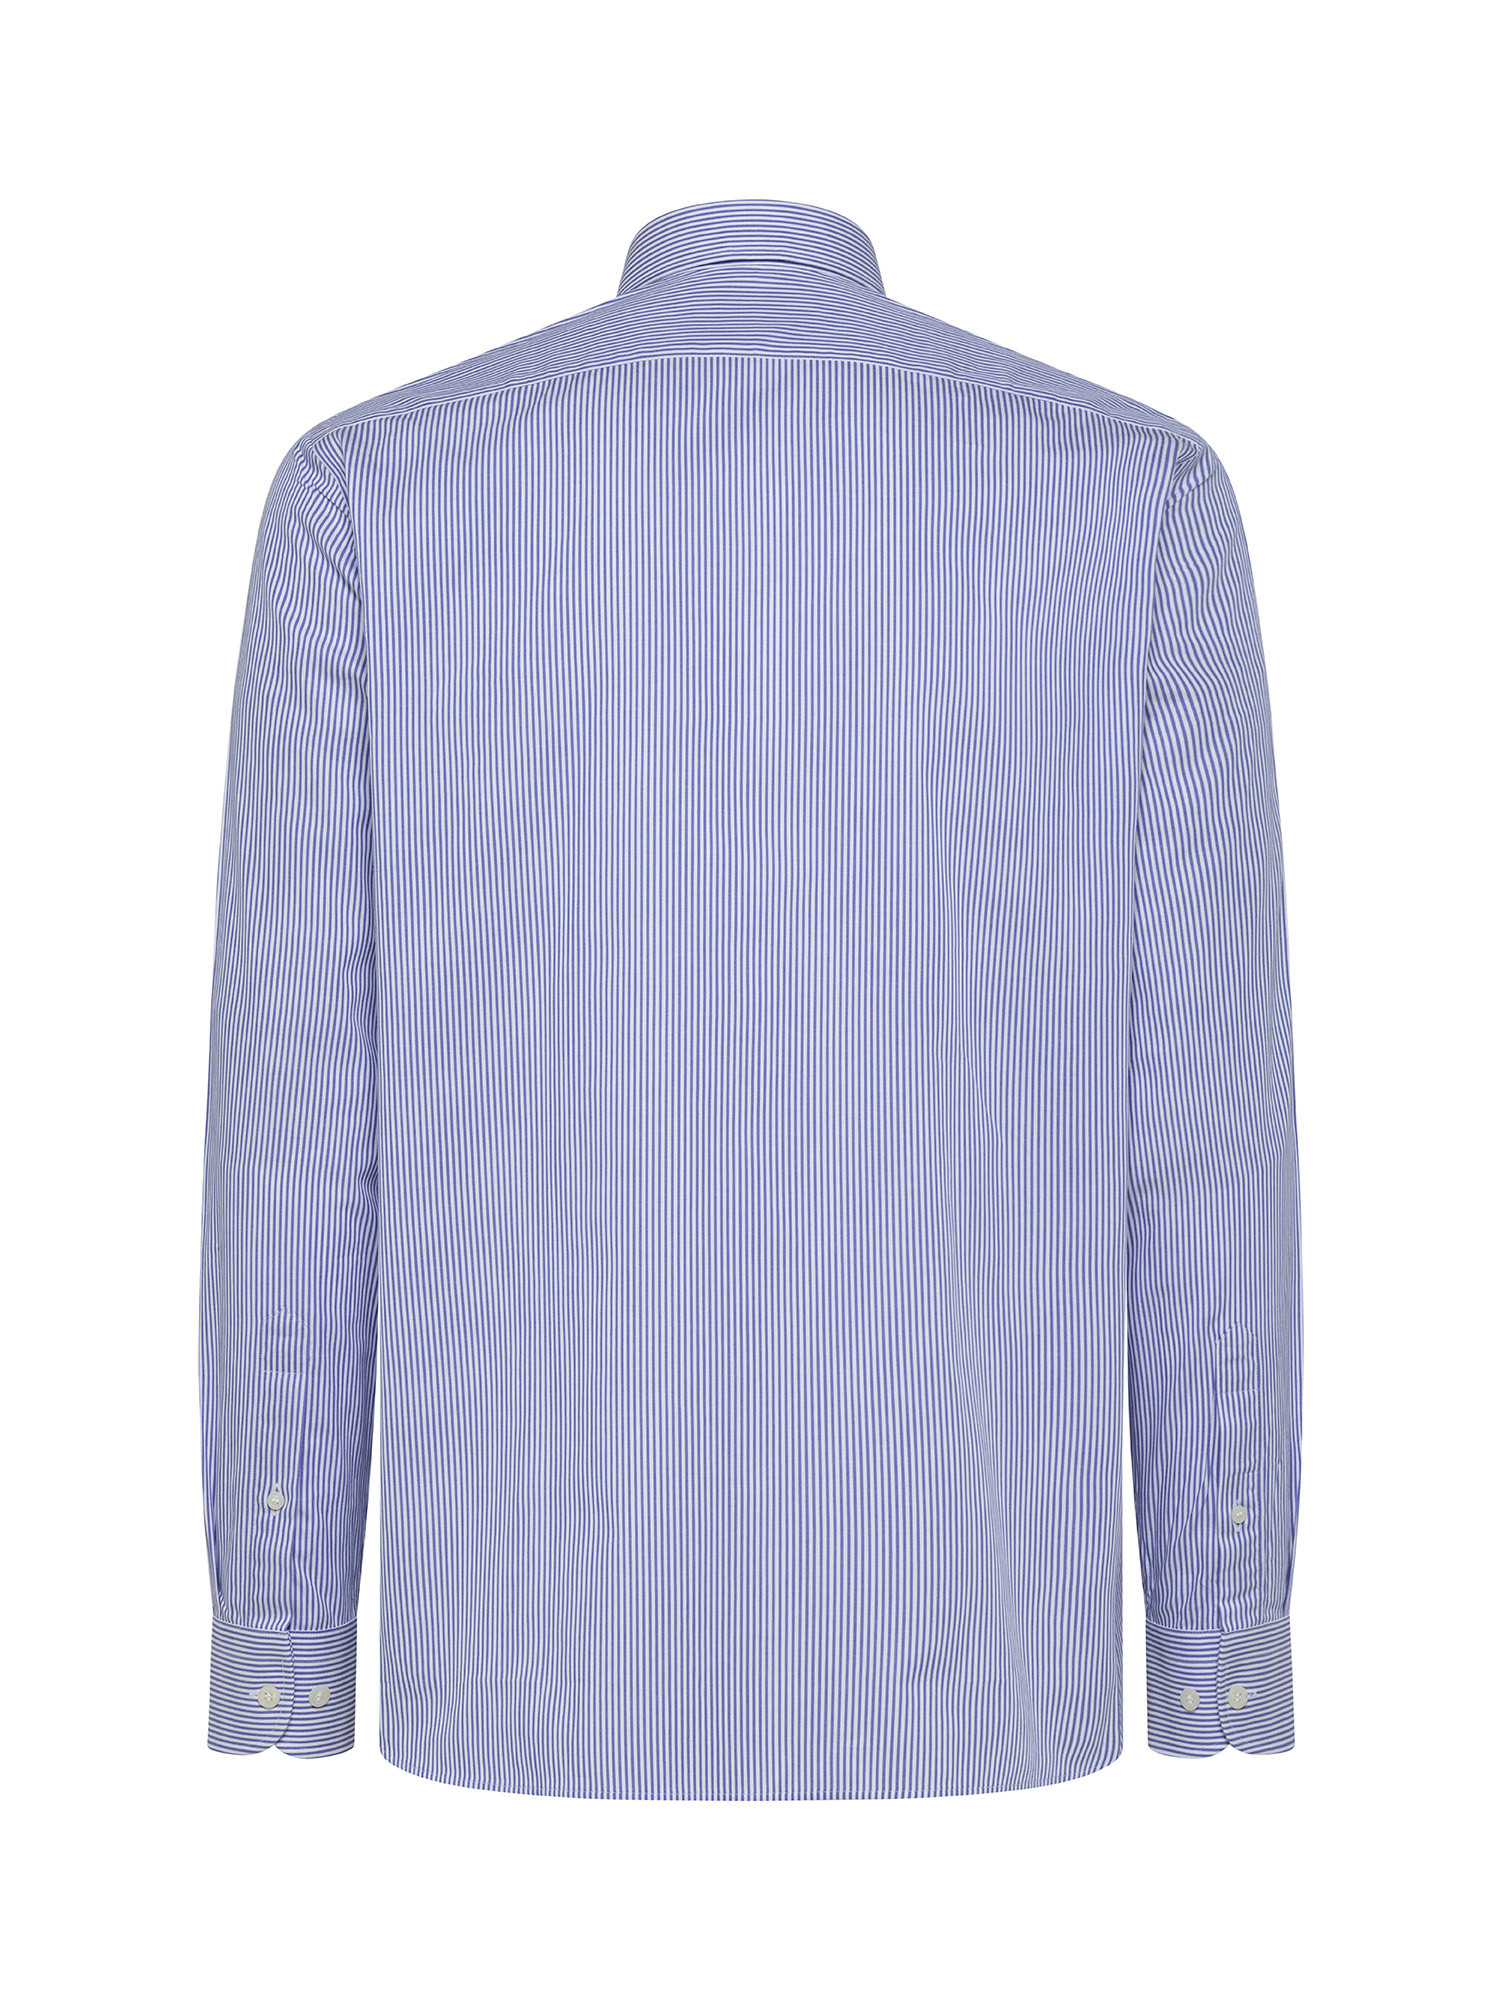 Basic tailor fit shirt in pure cotton, Light Blue, large image number 2